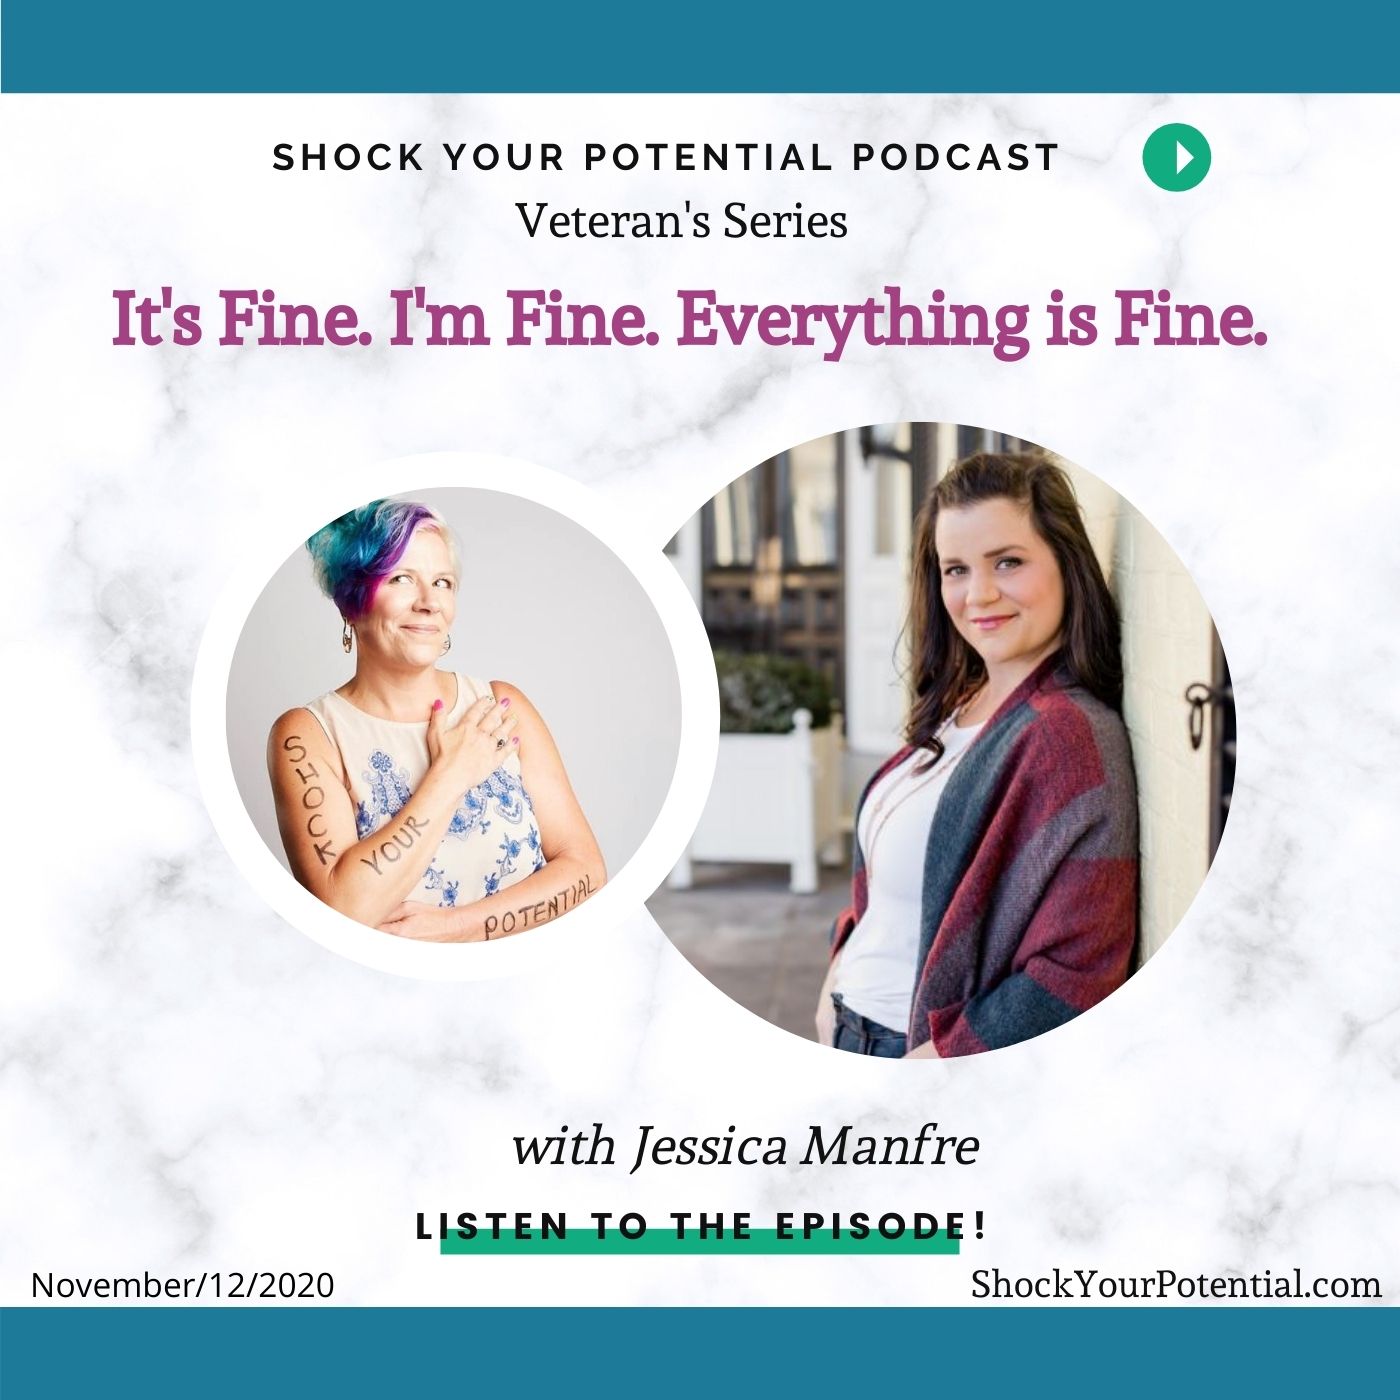 It’s Fine. I’m Fine. Everything is Fine. – Jessica Manfre